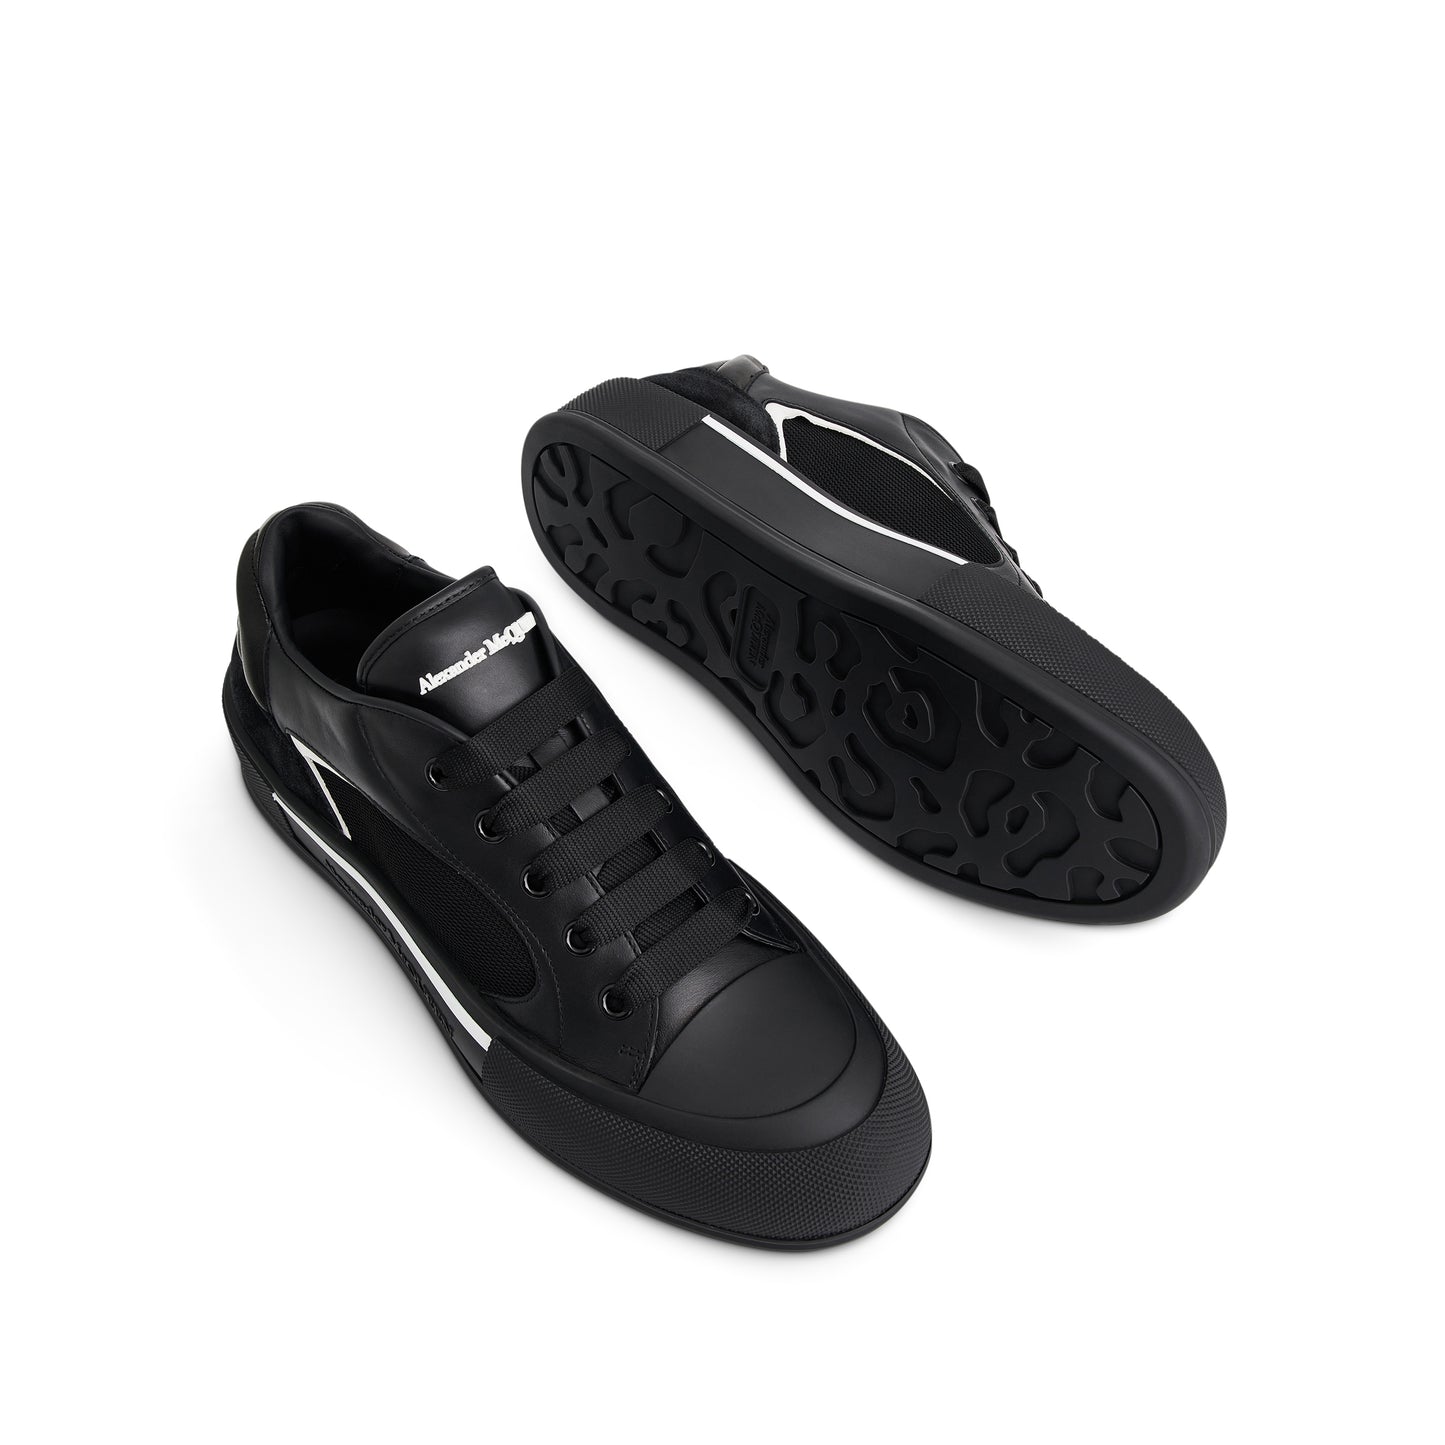 New Deck Lace-Up Plimsoll Sneaker in Black/White